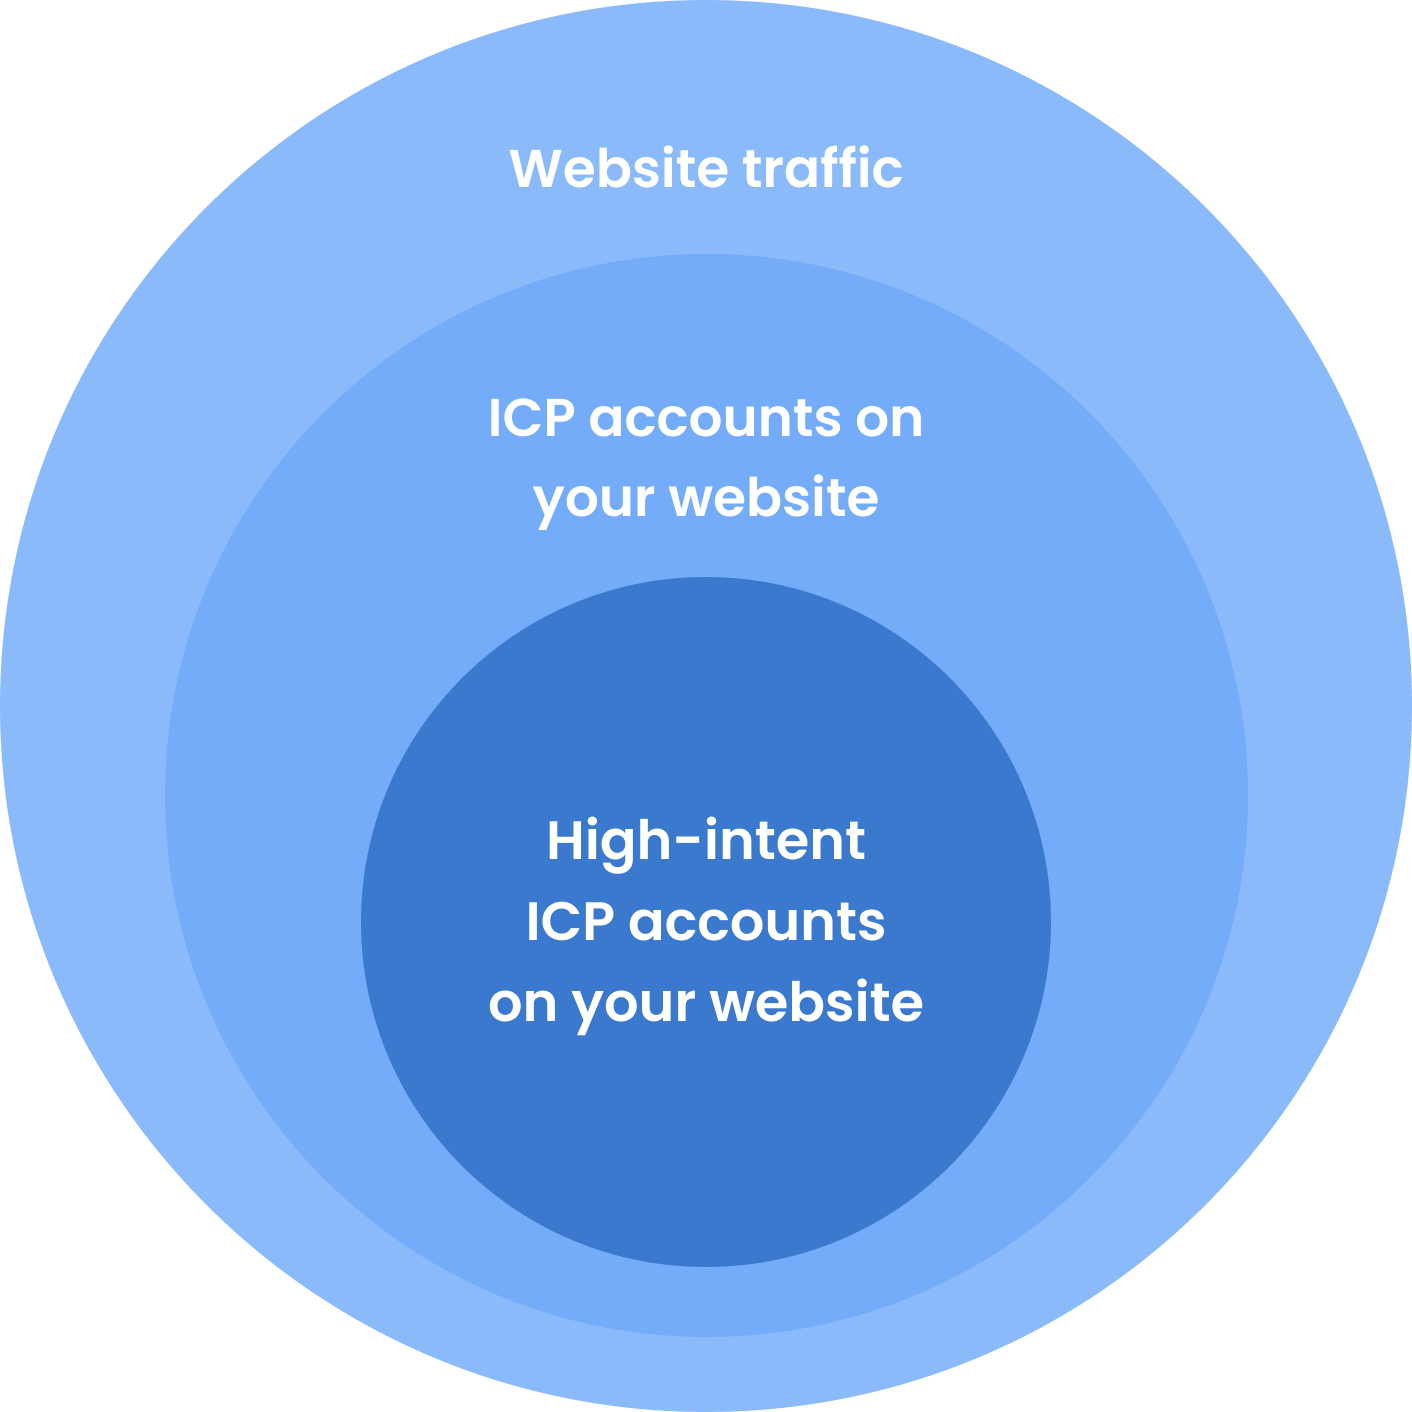 venn diagram showing the most valuable qualify accounts which is high-intent ICP accounts on your website